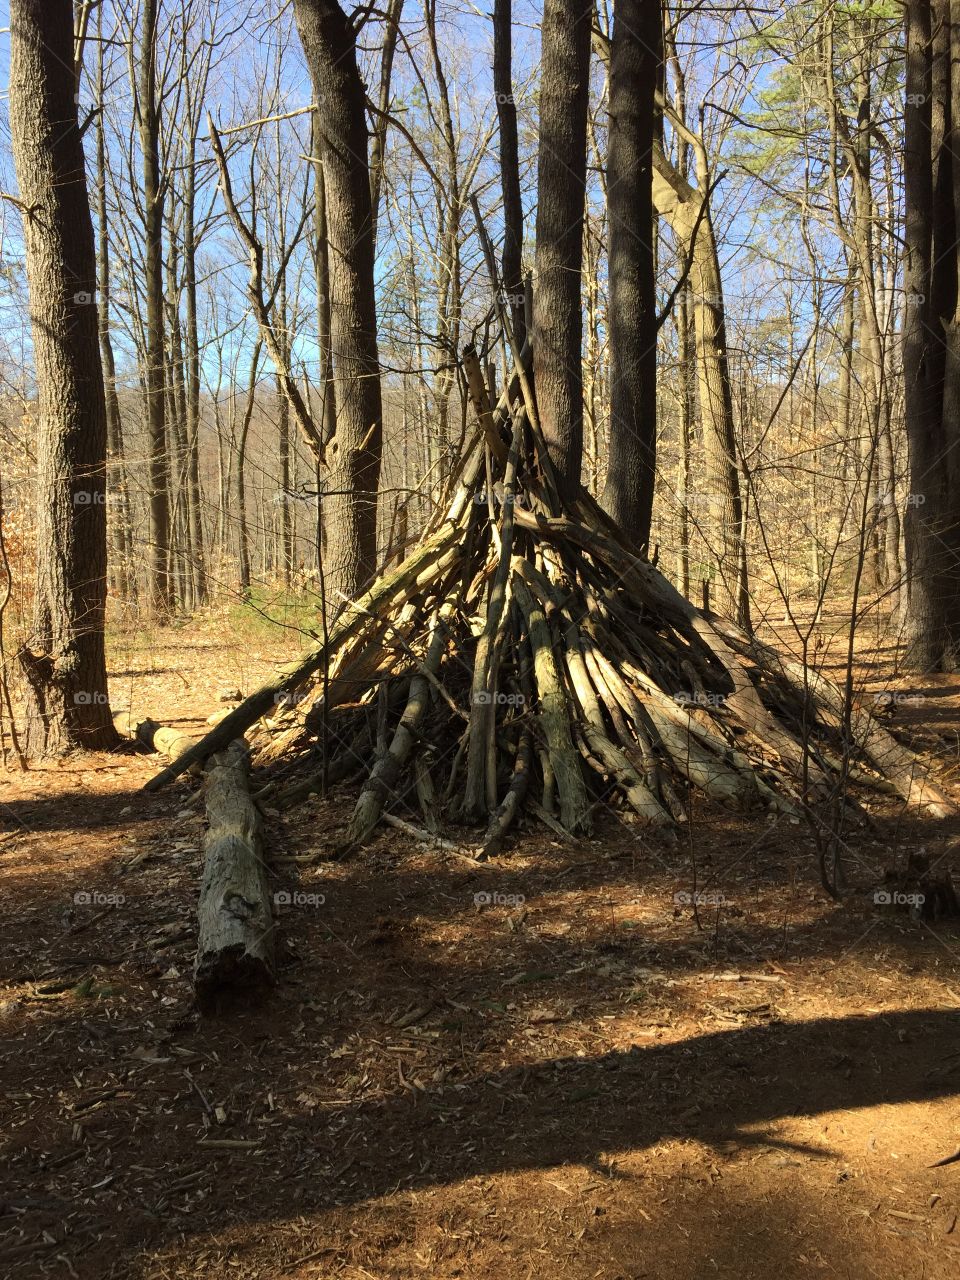 Found a teepee along the trail!